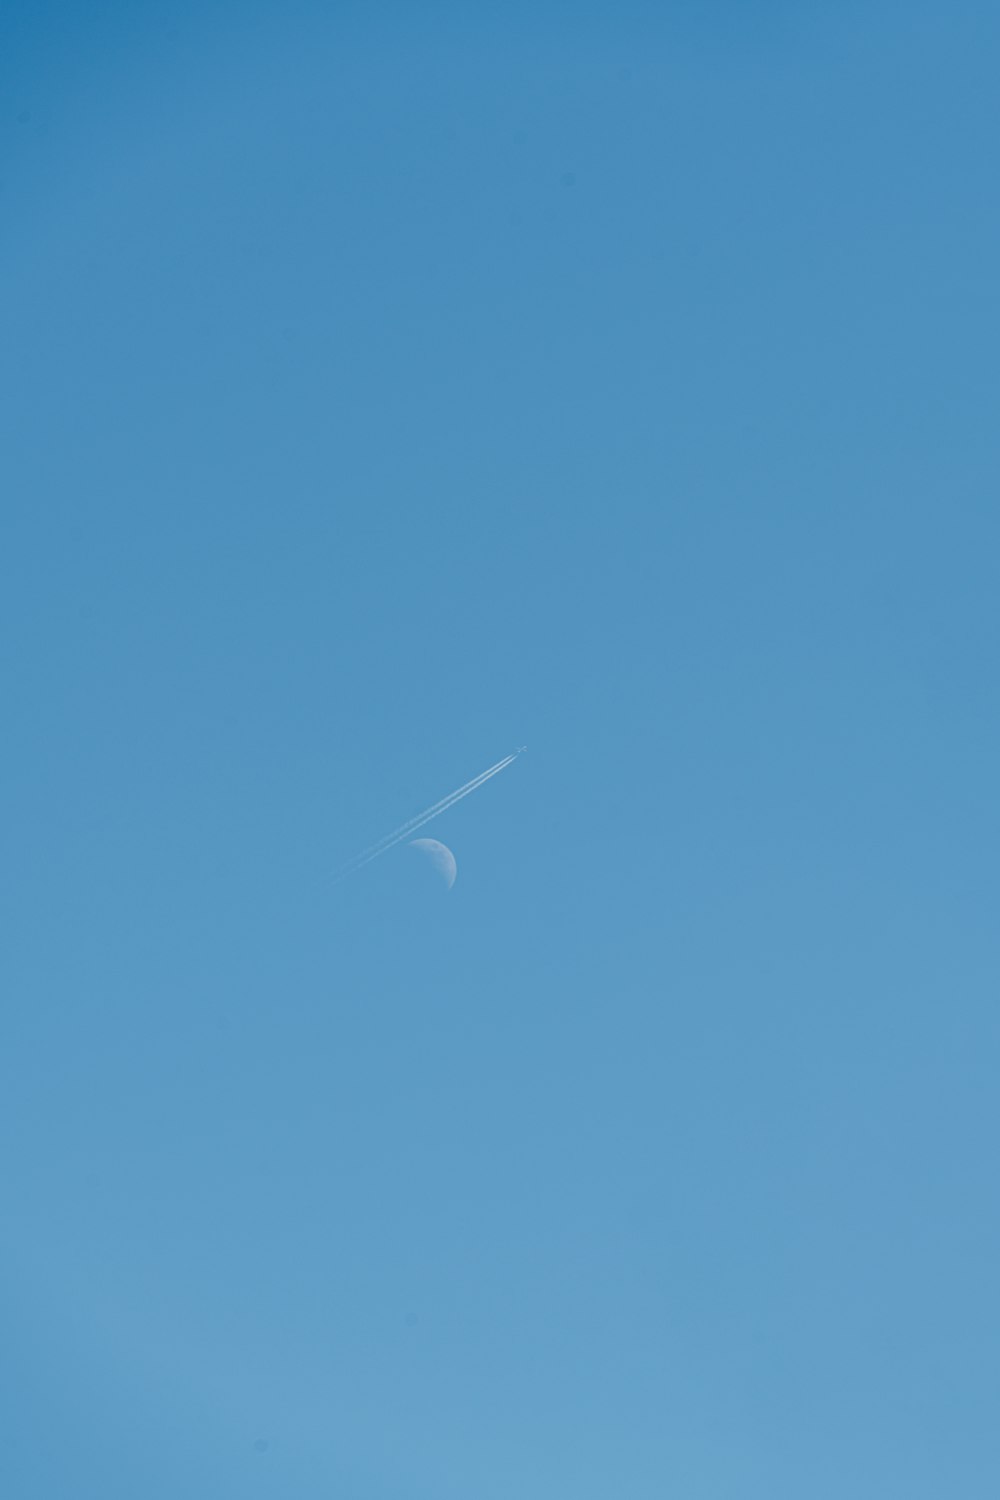 a plane flying in a clear blue sky